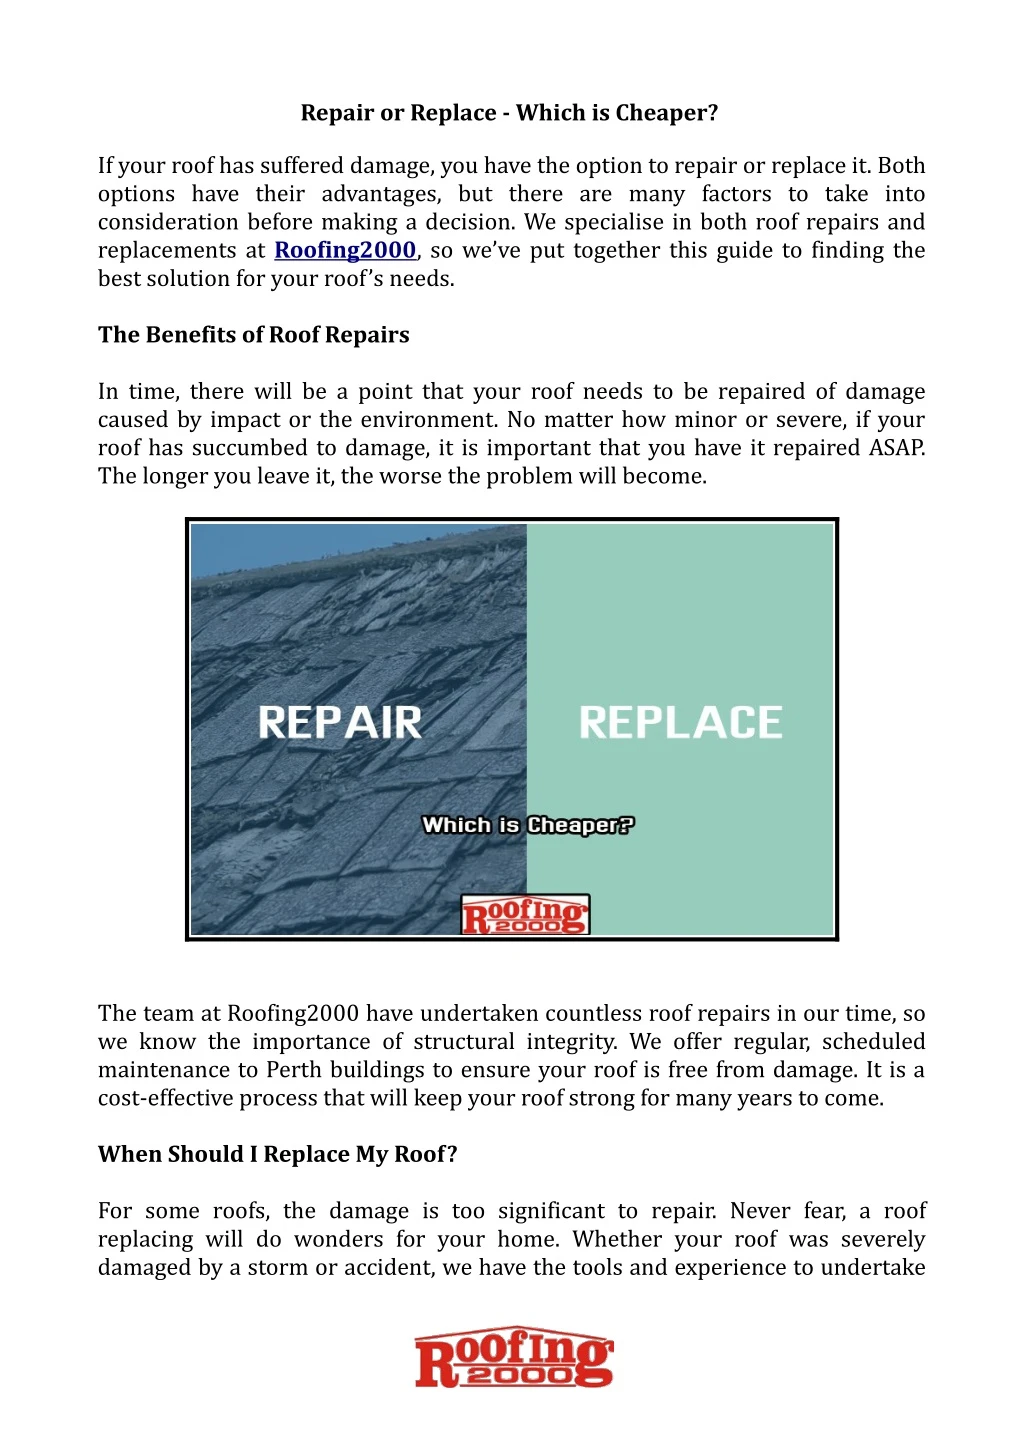 repair or replace which is cheaper